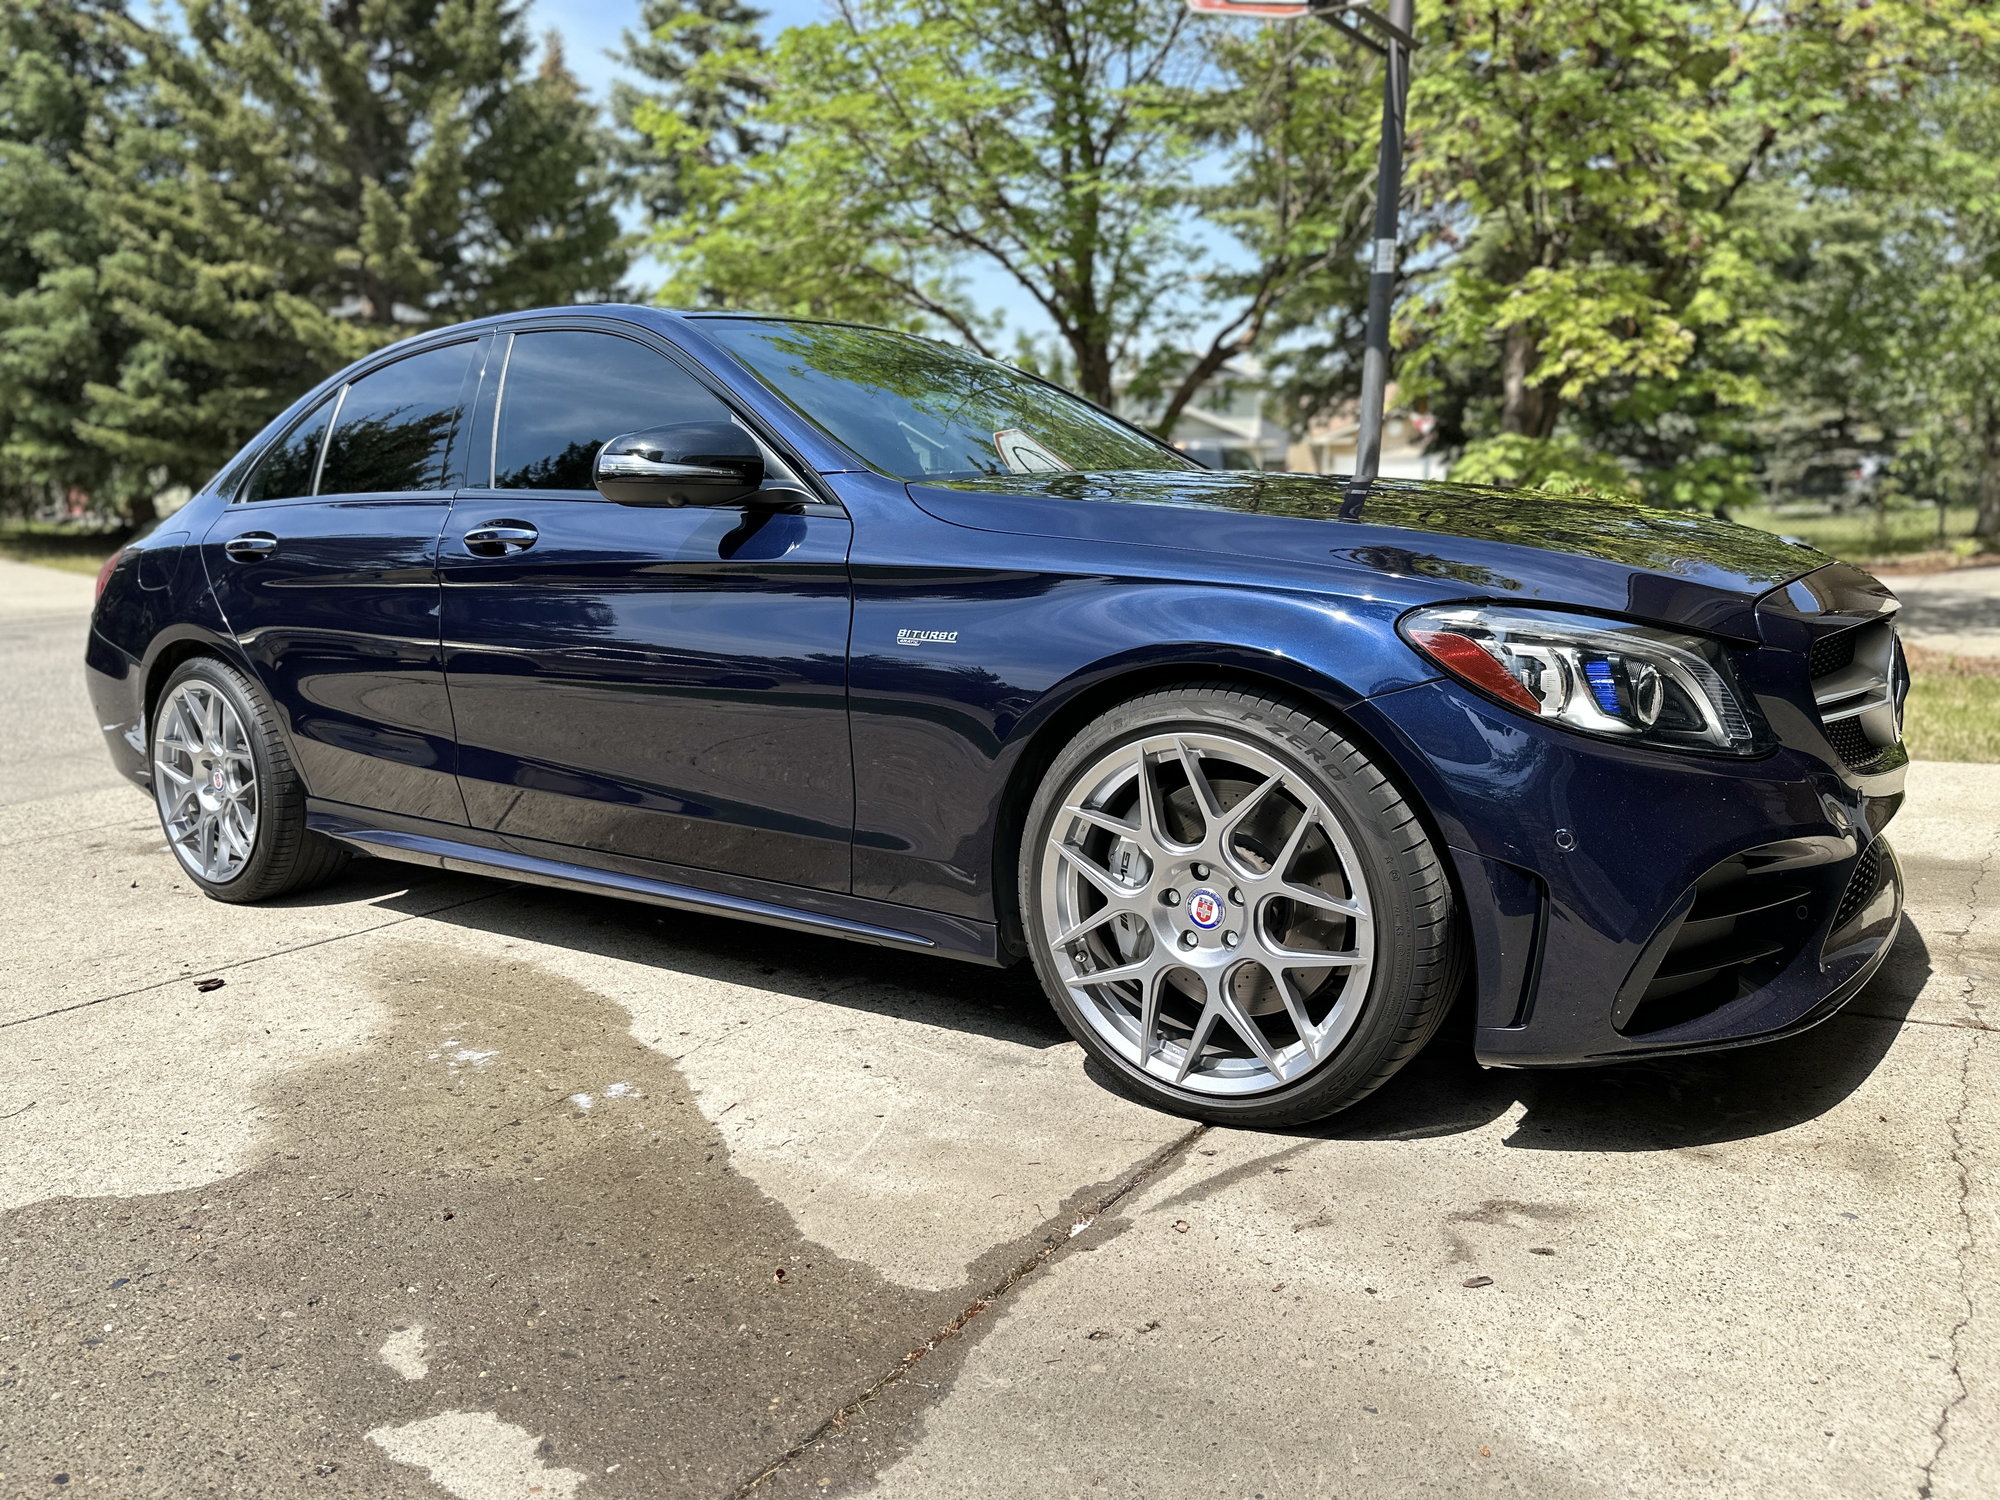 Wheels and Tires/Axles - HRE FF01 - 19’ C43 wheels for sale w/ spacers - Used - 2019 to 2022 Mercedes-Benz C43 AMG - Calgary, AB T2X2T2, Canada